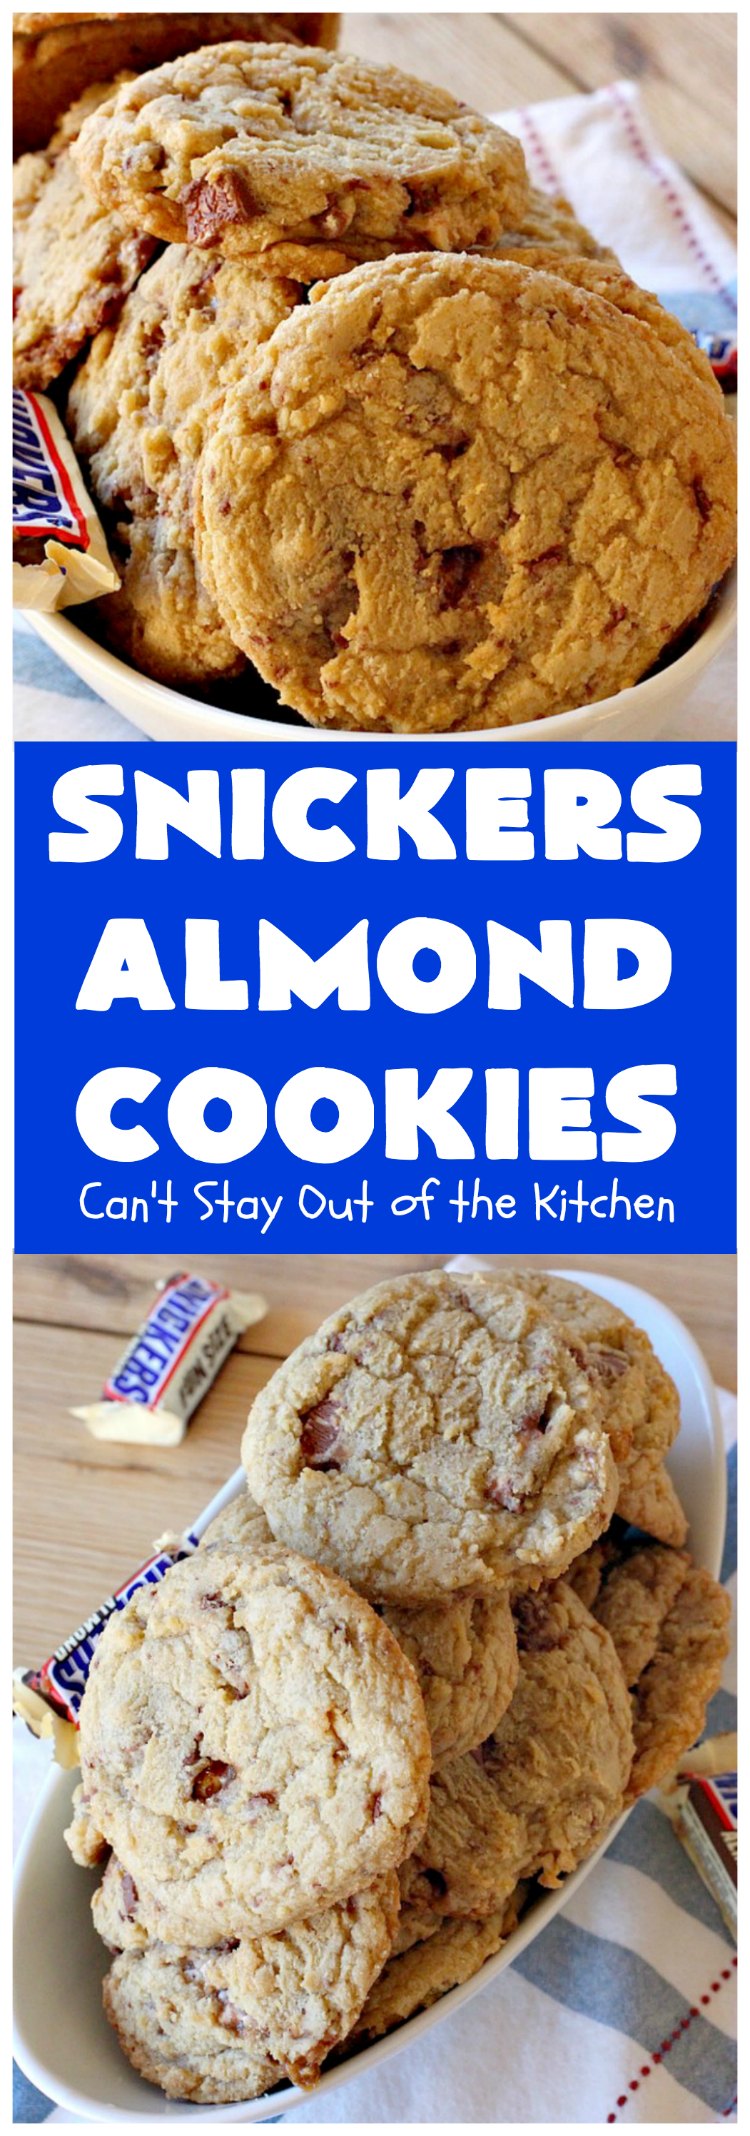 Snickers Almond Cookies | Can't Stay Out of the Kitchen